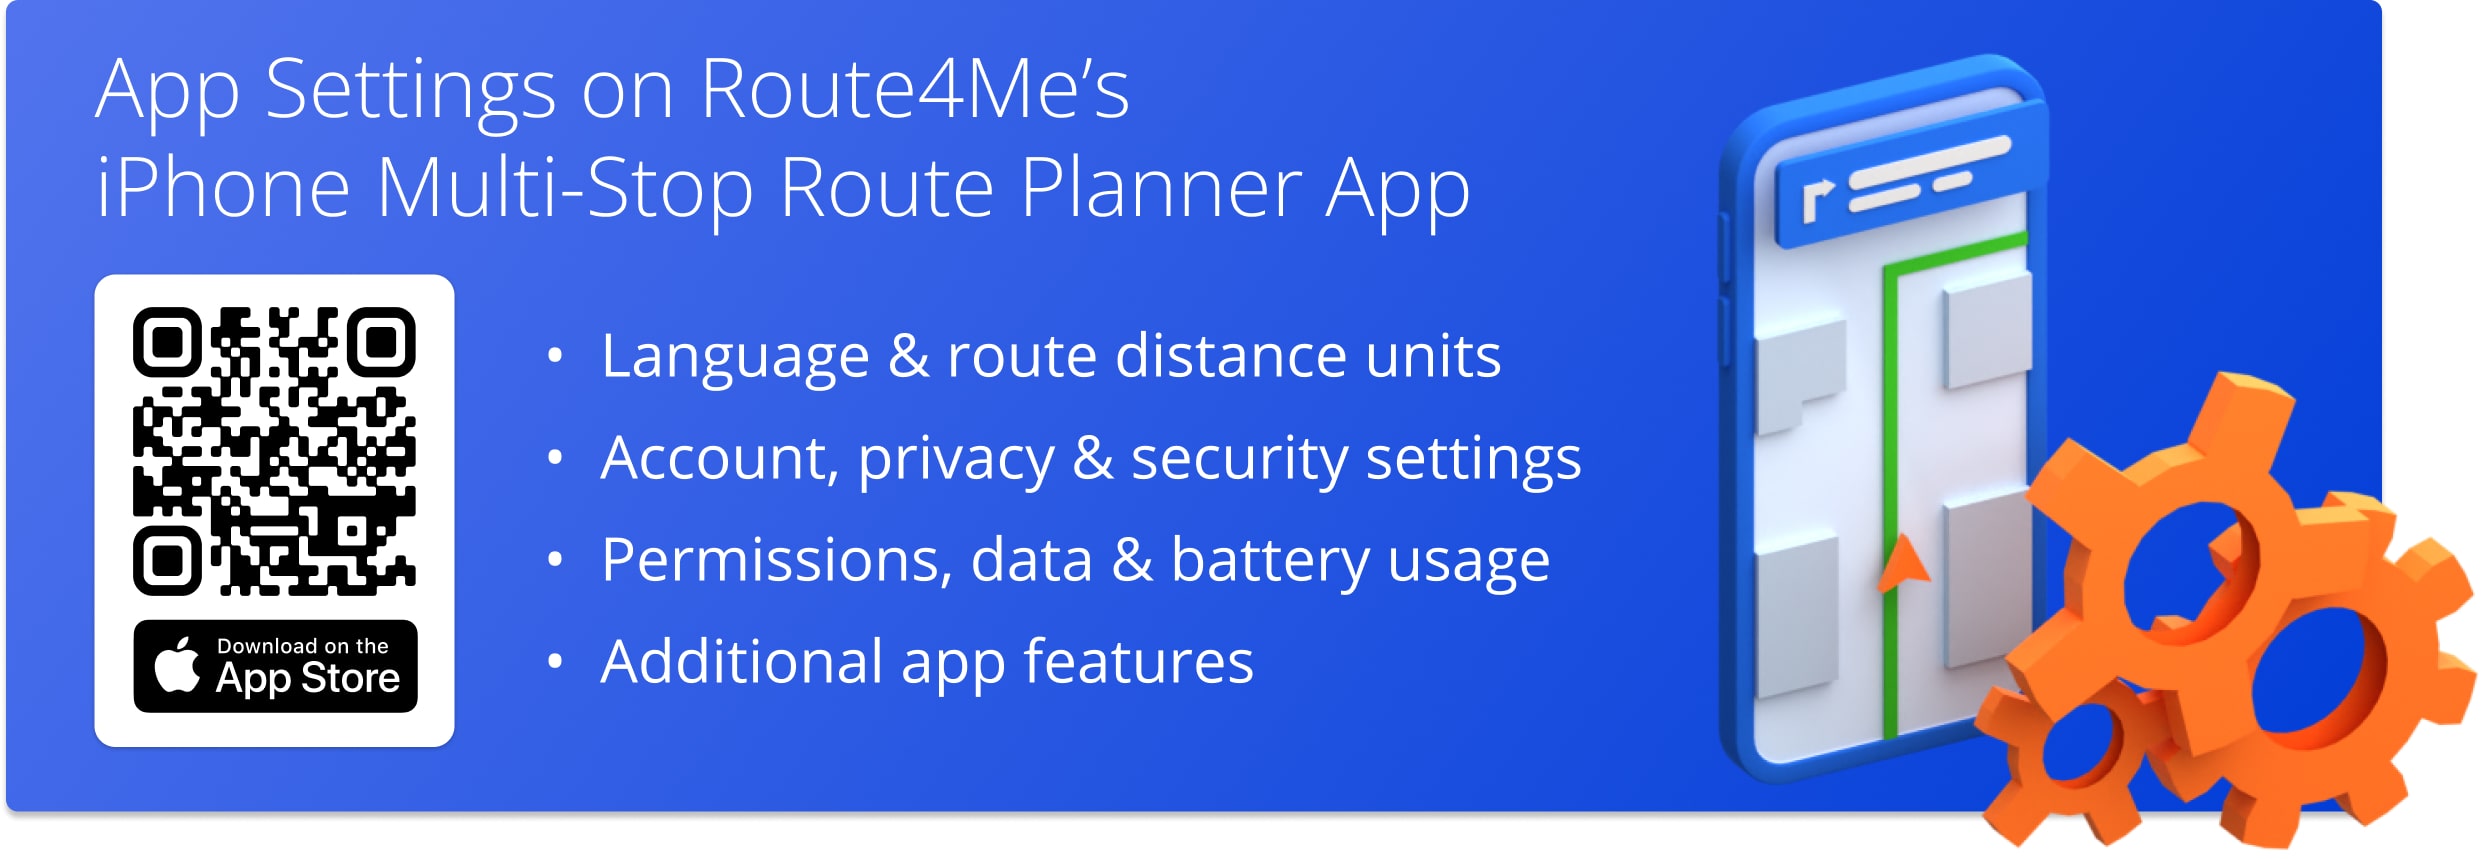 Route4Me iPhone Route Planner app settings: language and distance units, security and privacy, data usage, and additional features.